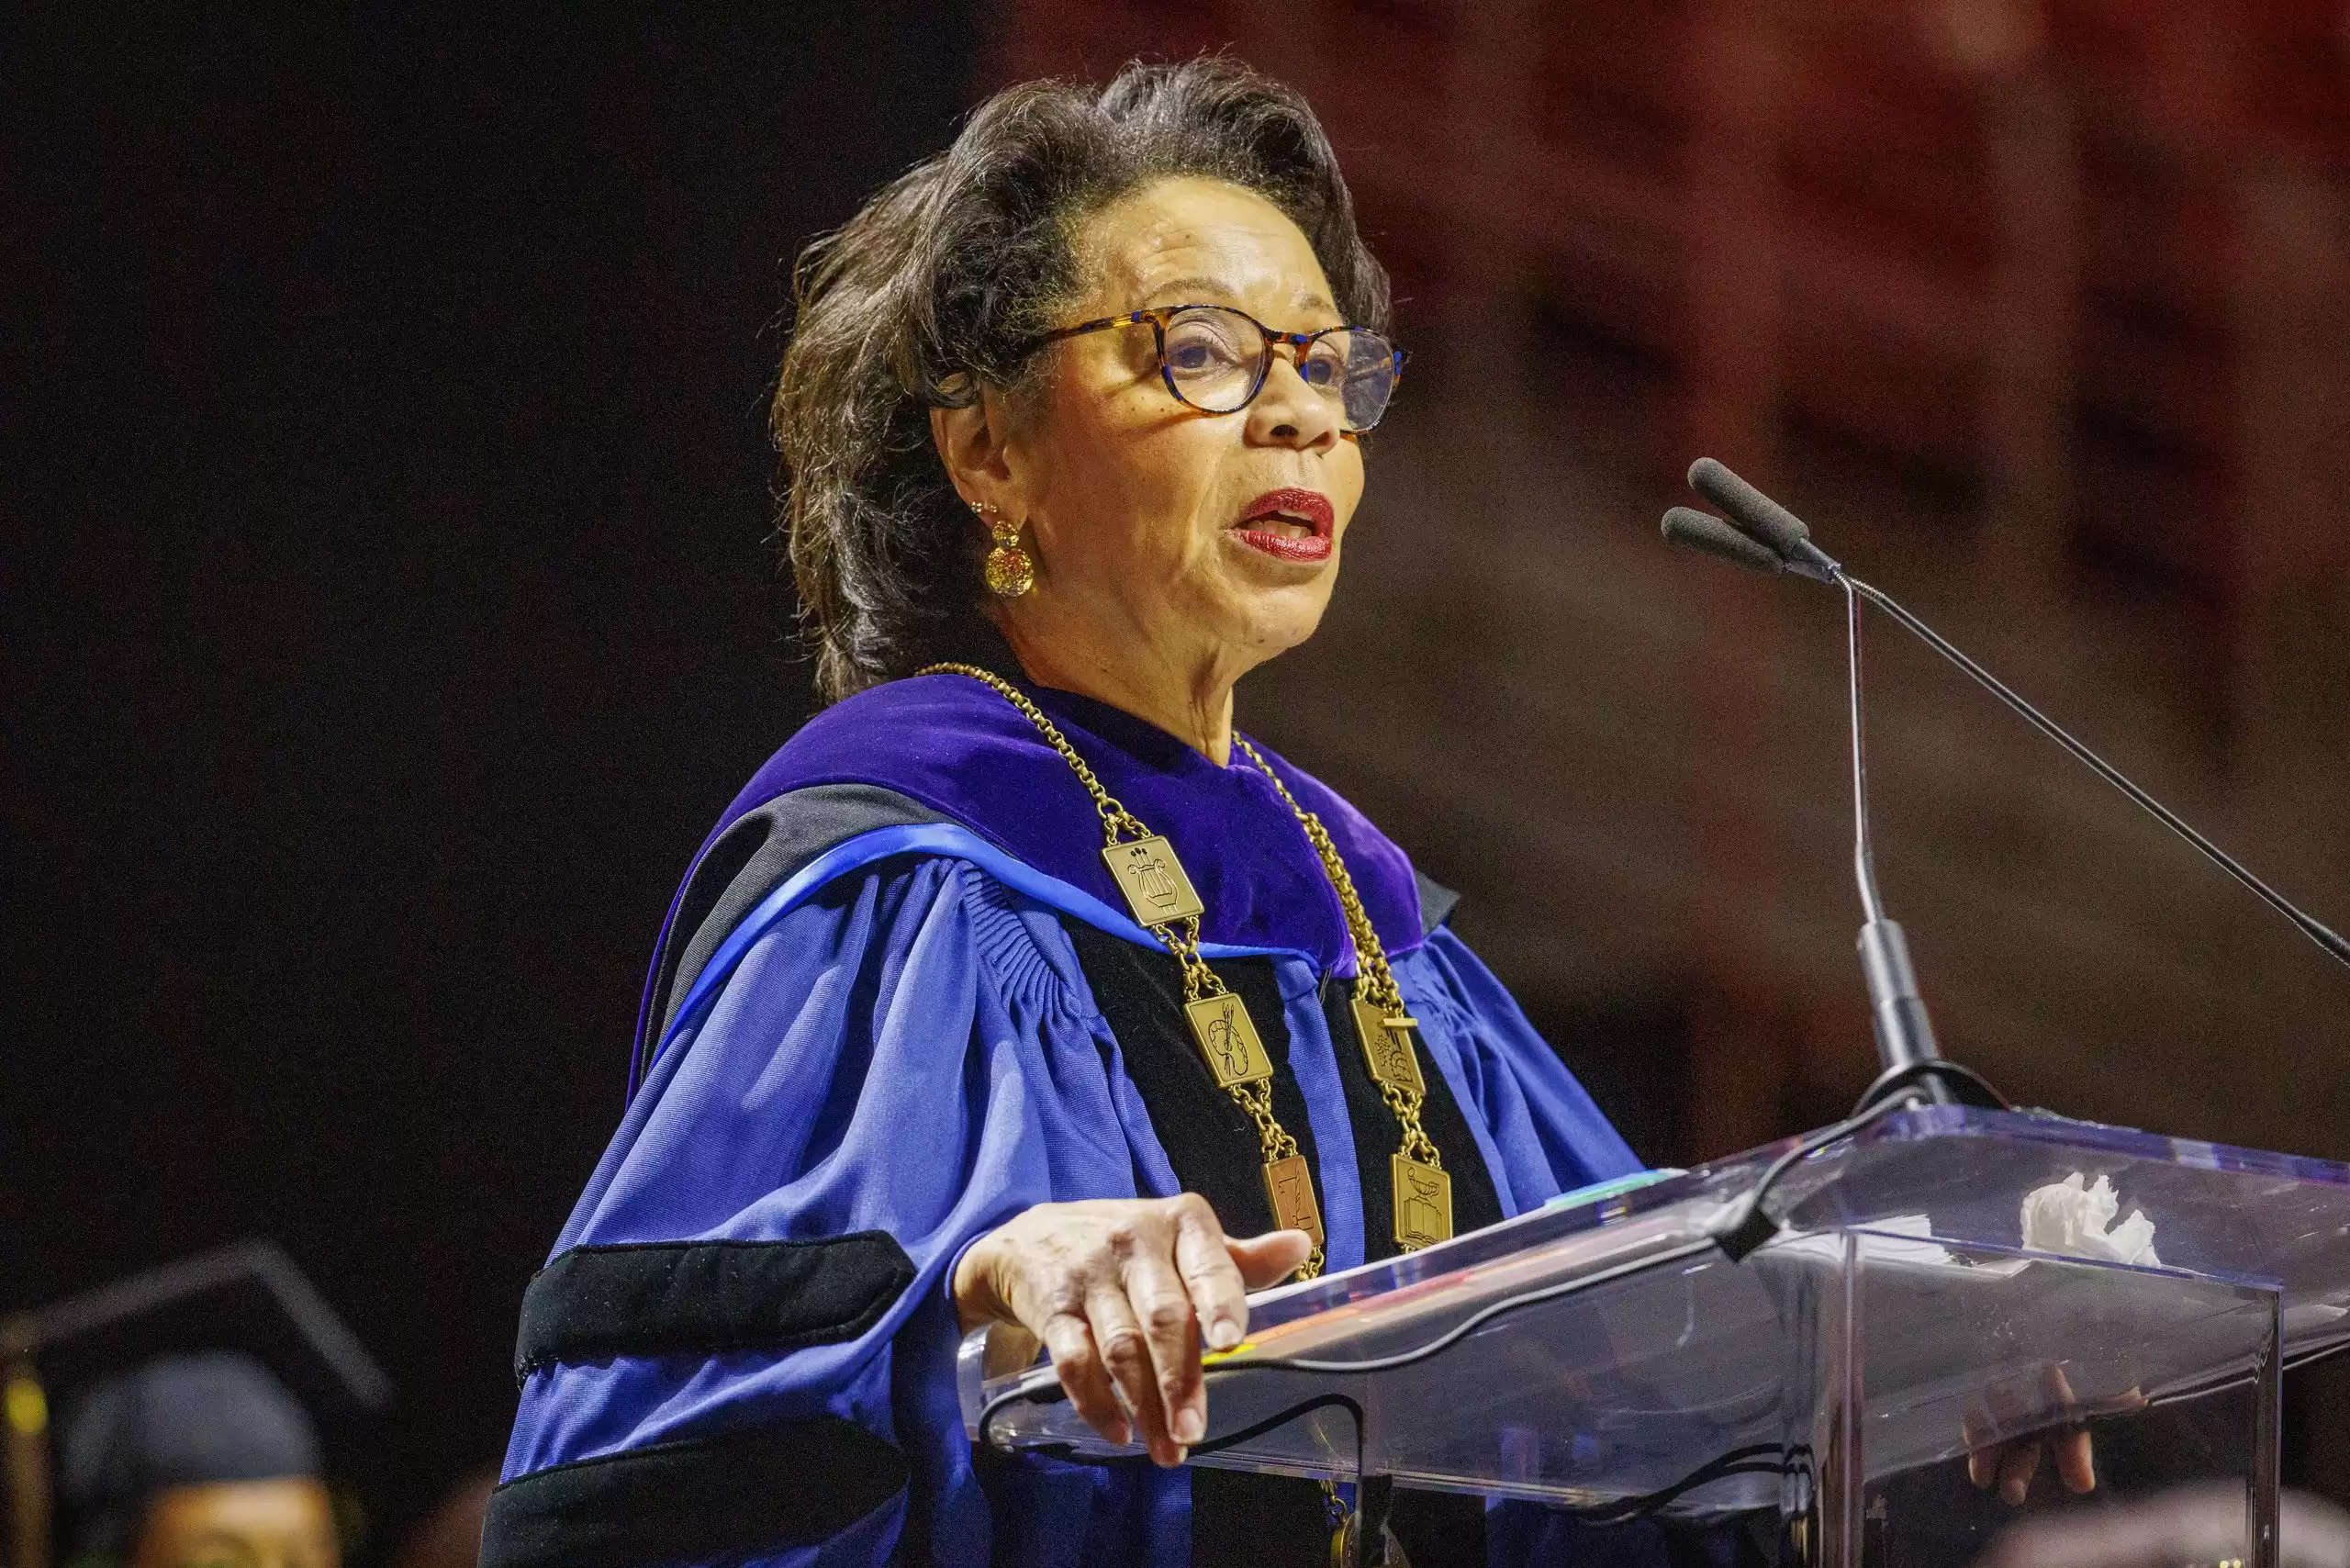 "Acting Temple University President JoAnne A. Epps Passes Away On Stage After Falling Ill"